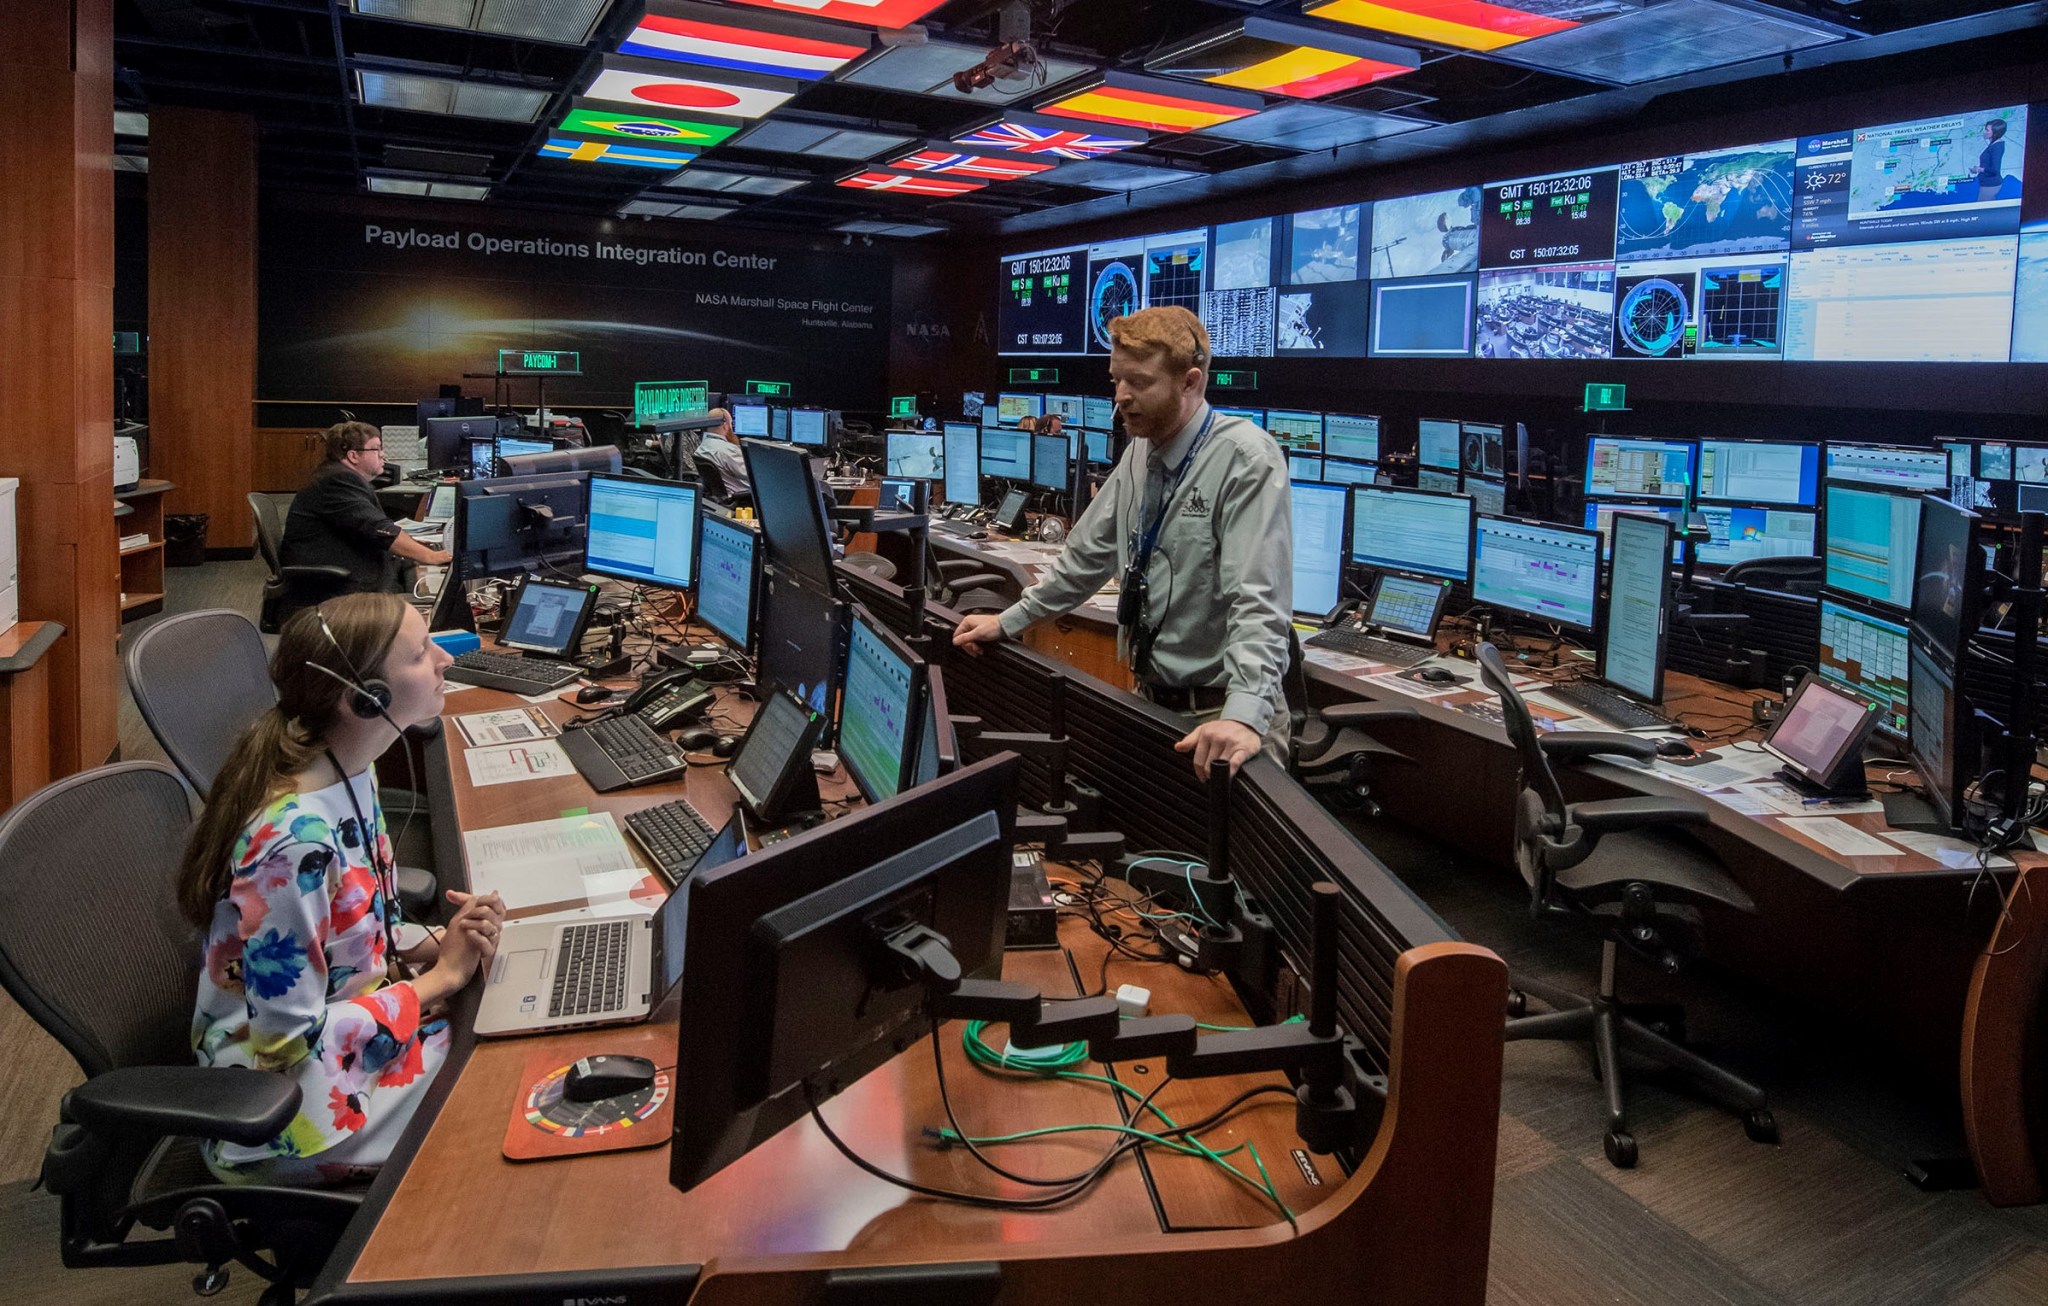 The Payload Operations Integration Center at Marshall Space Flight Center.